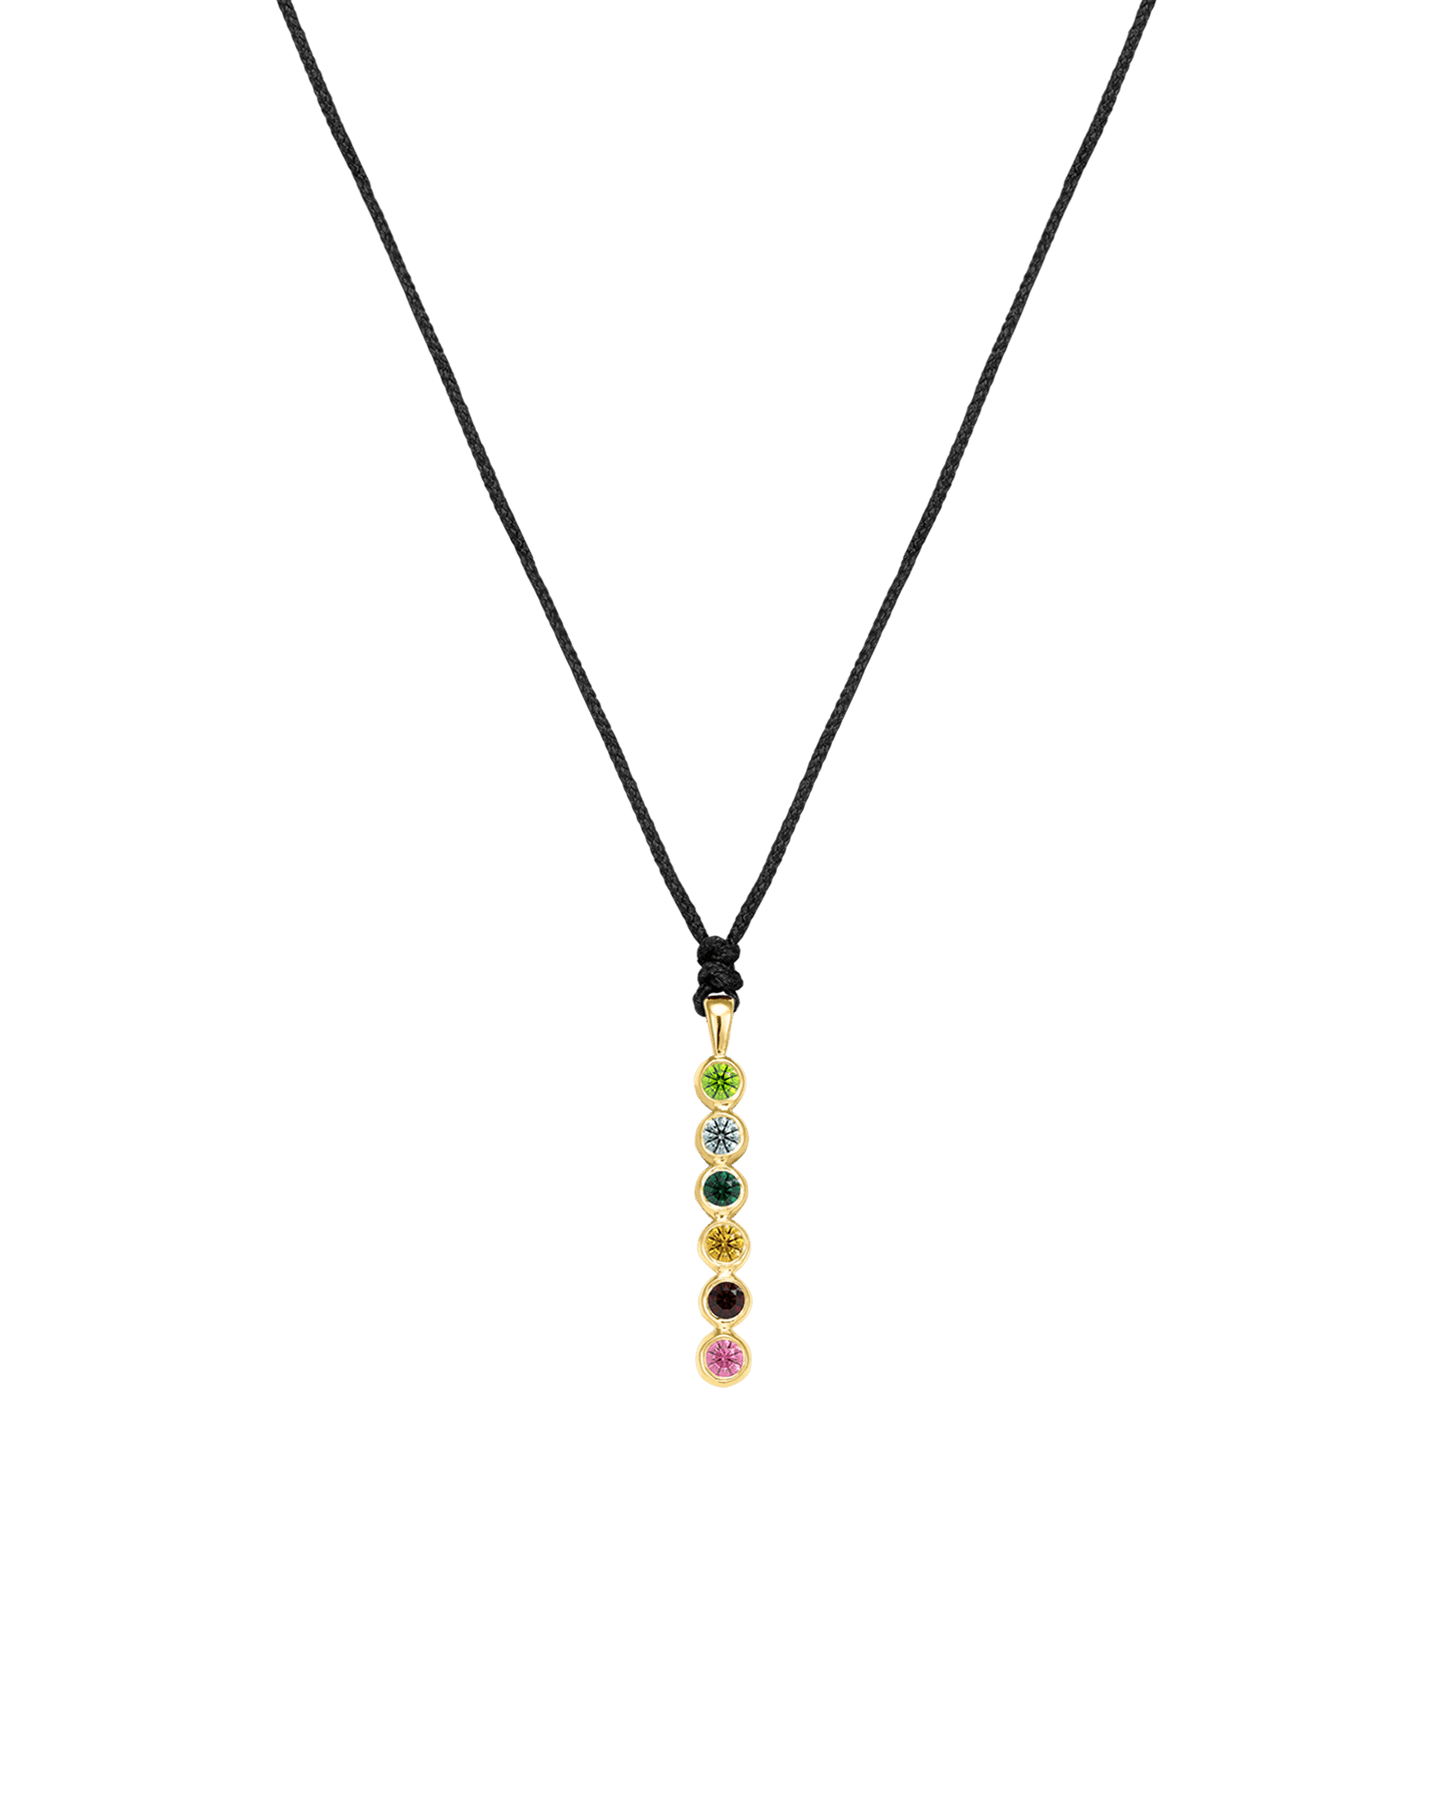 The Birthstones Bar Necklace - 14K Yellow Gold Necklaces 14K Solid Gold Black 2 